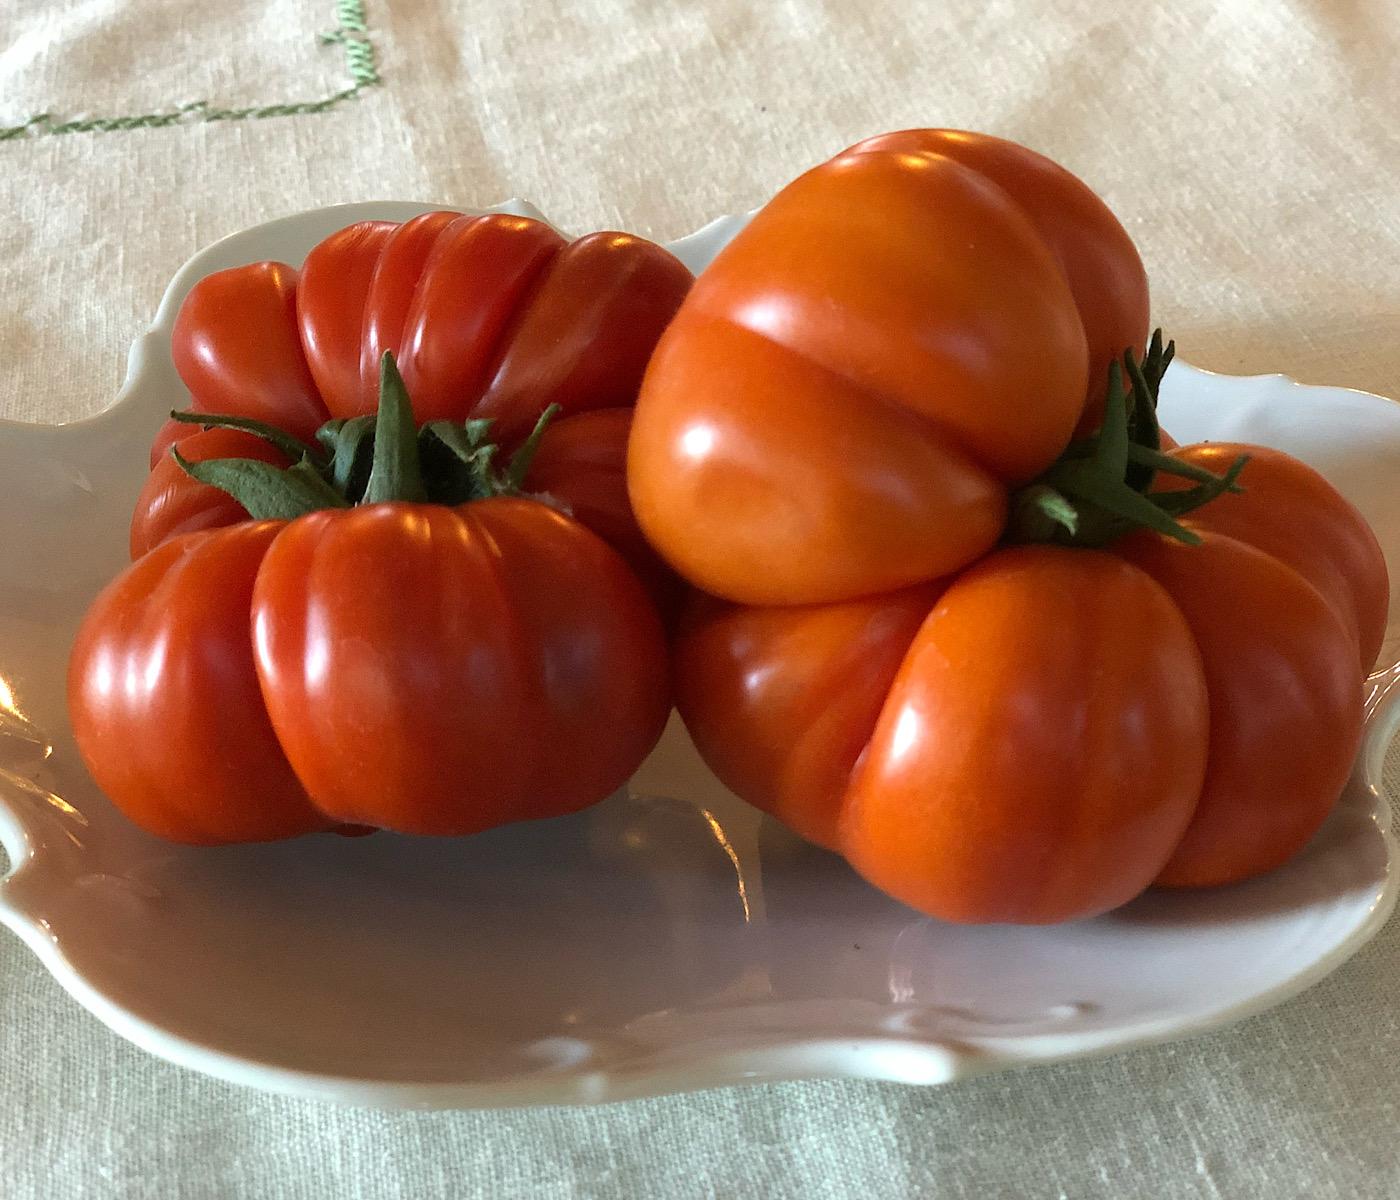 Two costoluto heirloom tomatoes on a plate